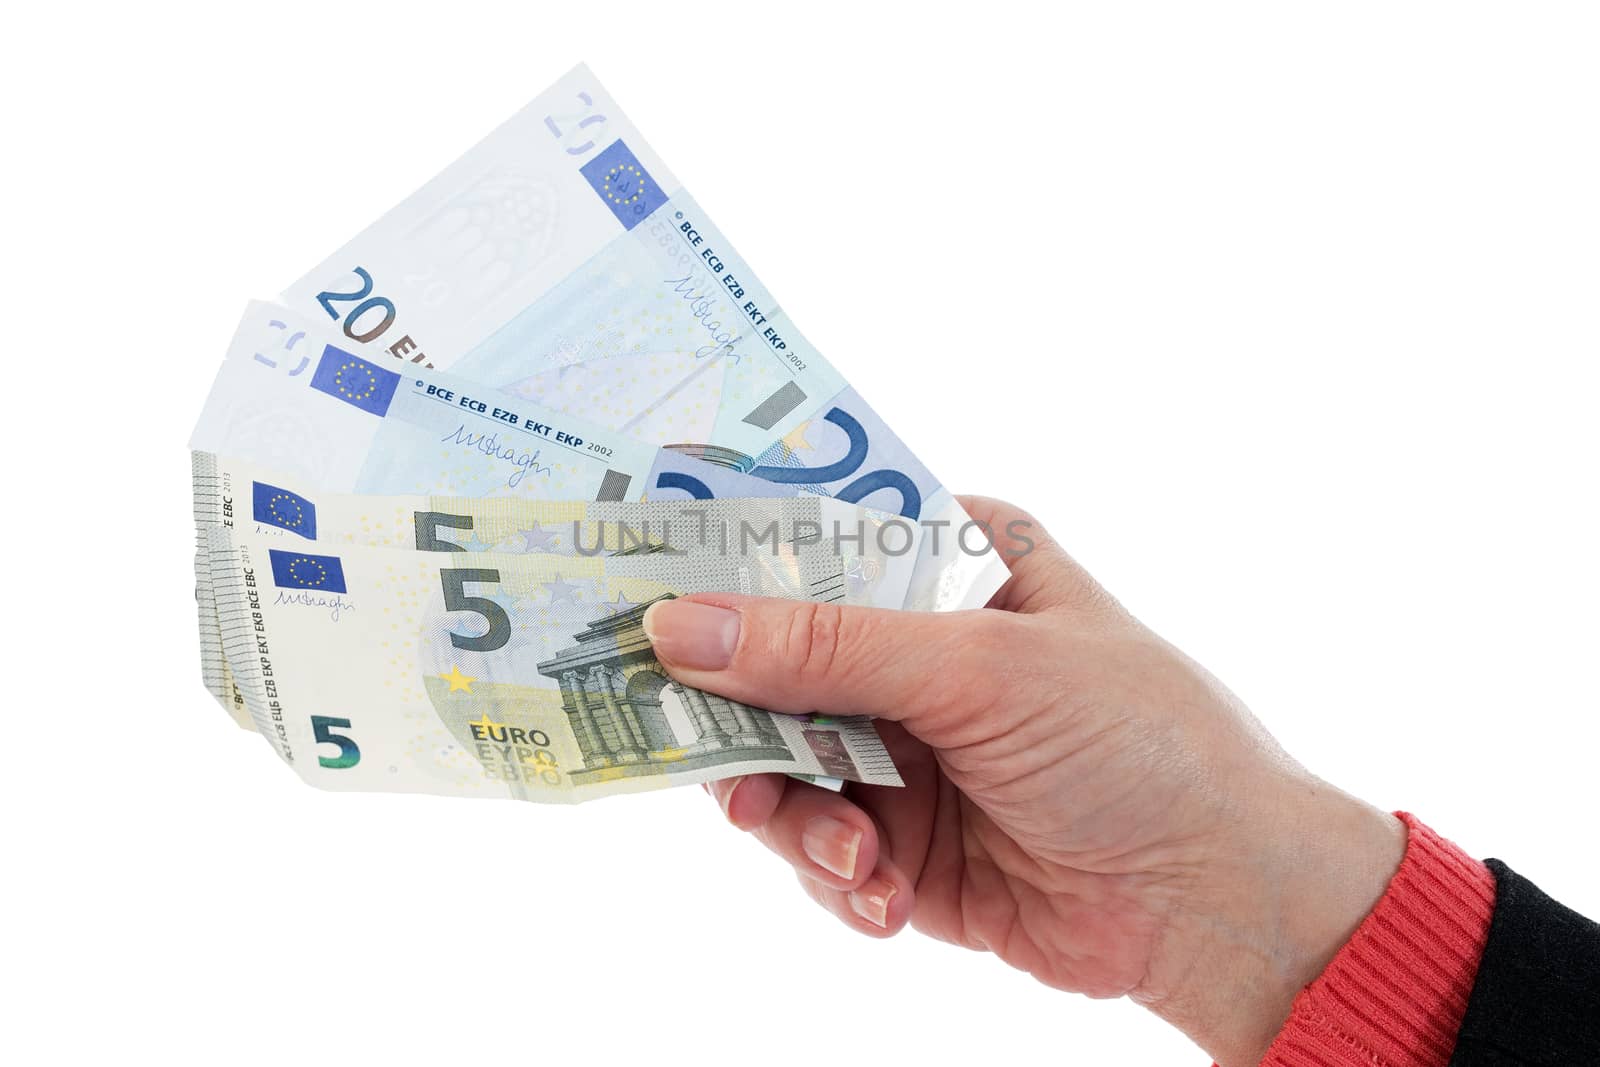 Caucasian hand holding a wad of euros for payment, isolated on white